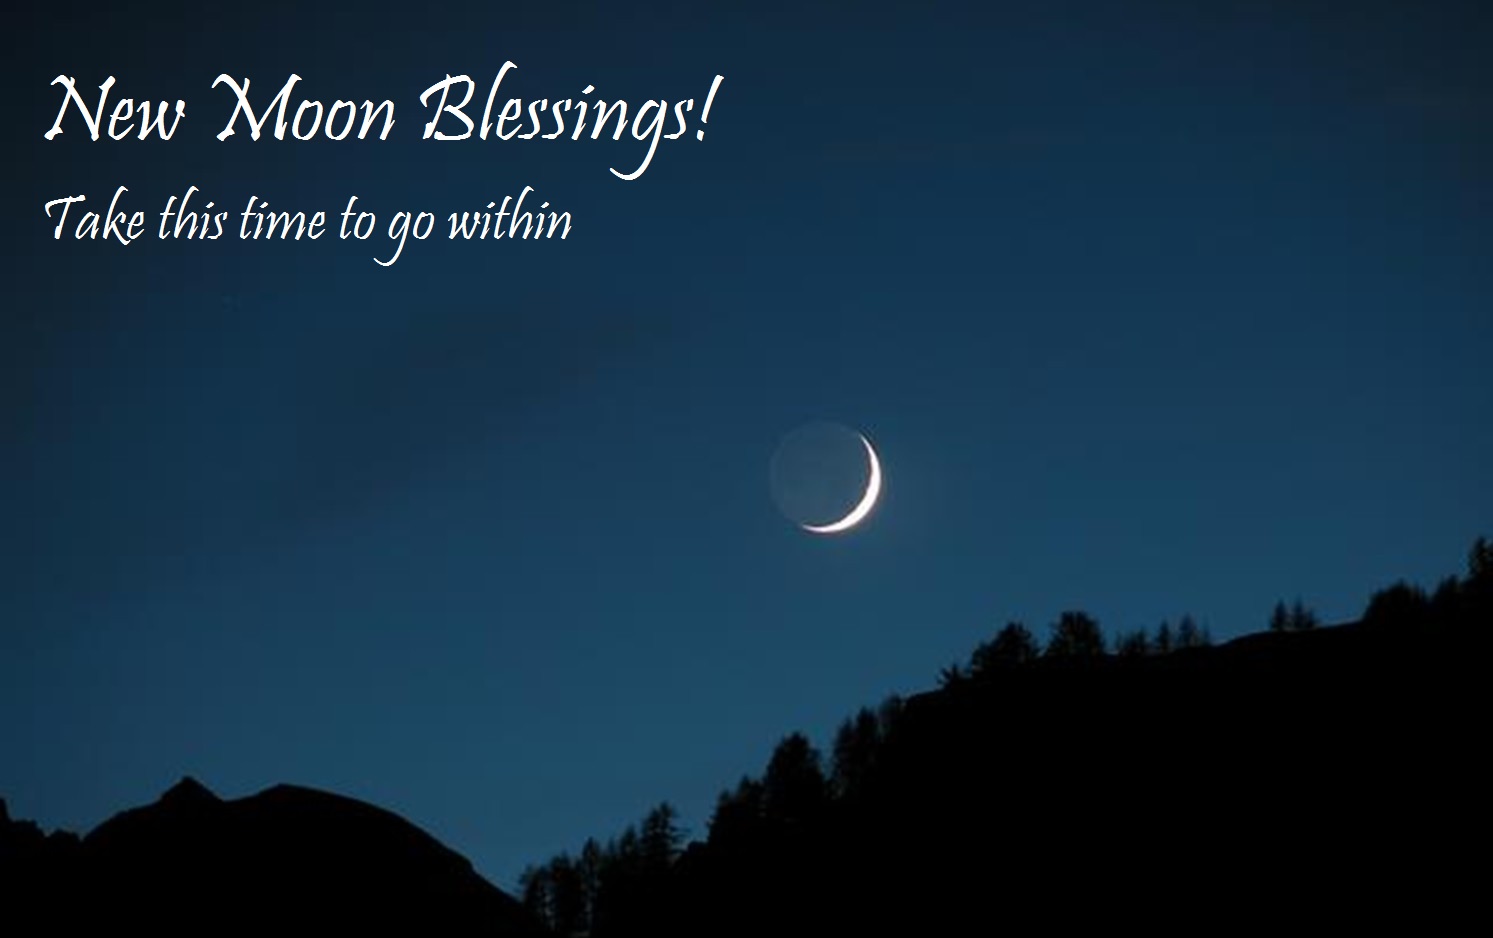 Blessed moon. Promise of a New Moon.